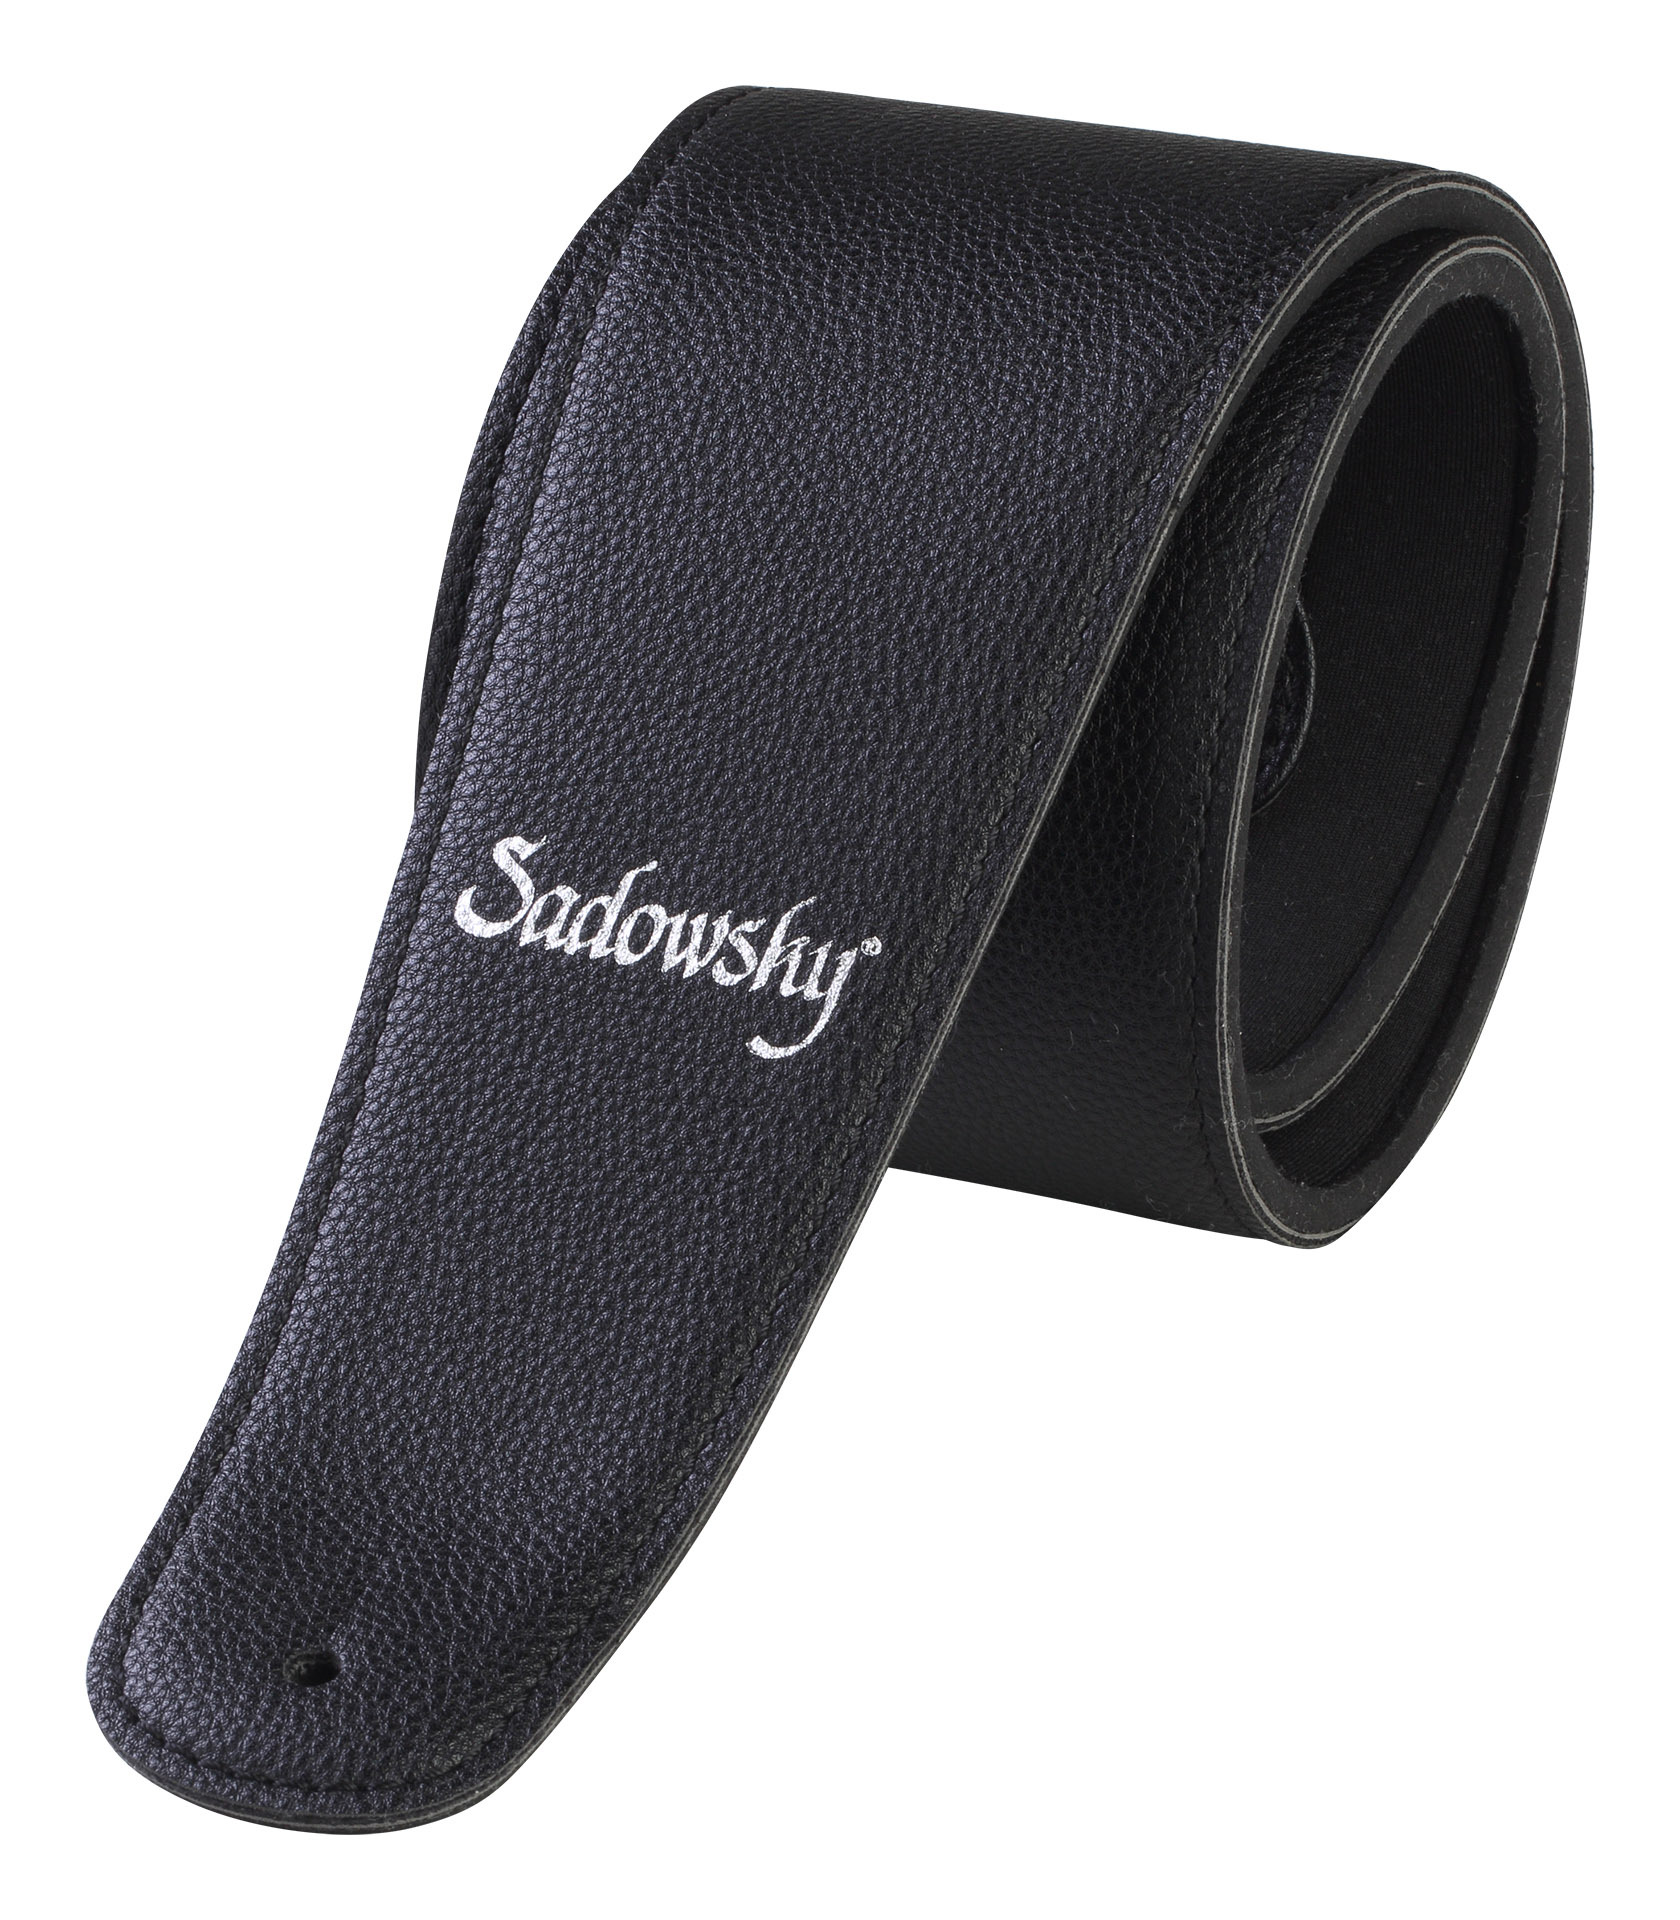 Sadowsky Synthetic Leather Bass Strap with Neoprene Padding - Black, Silver Embossing